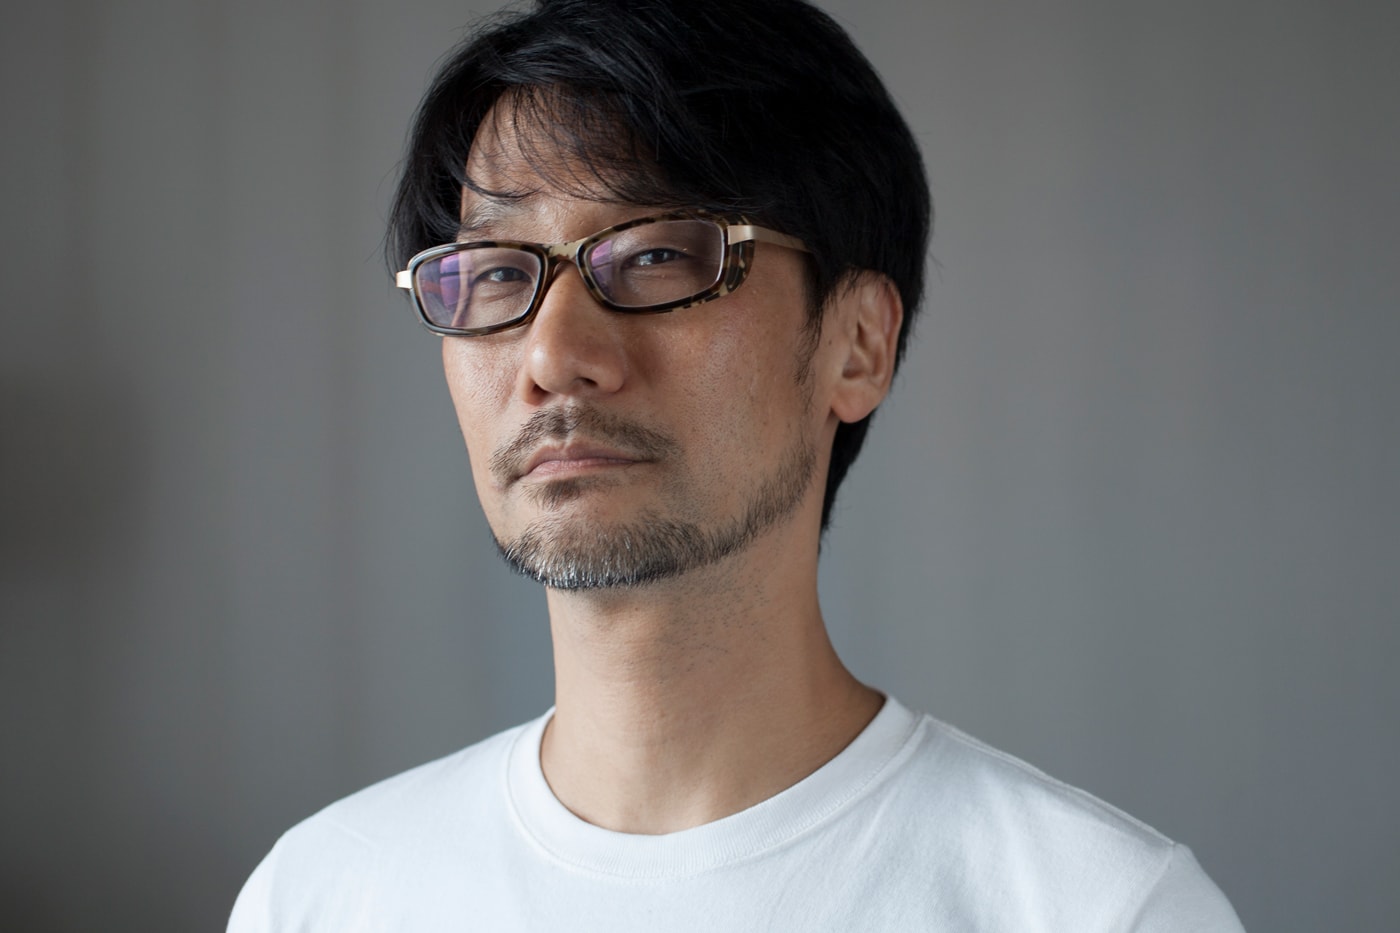 Hideo Kojima Fans Reveal Their Most Favorite Trailer from the